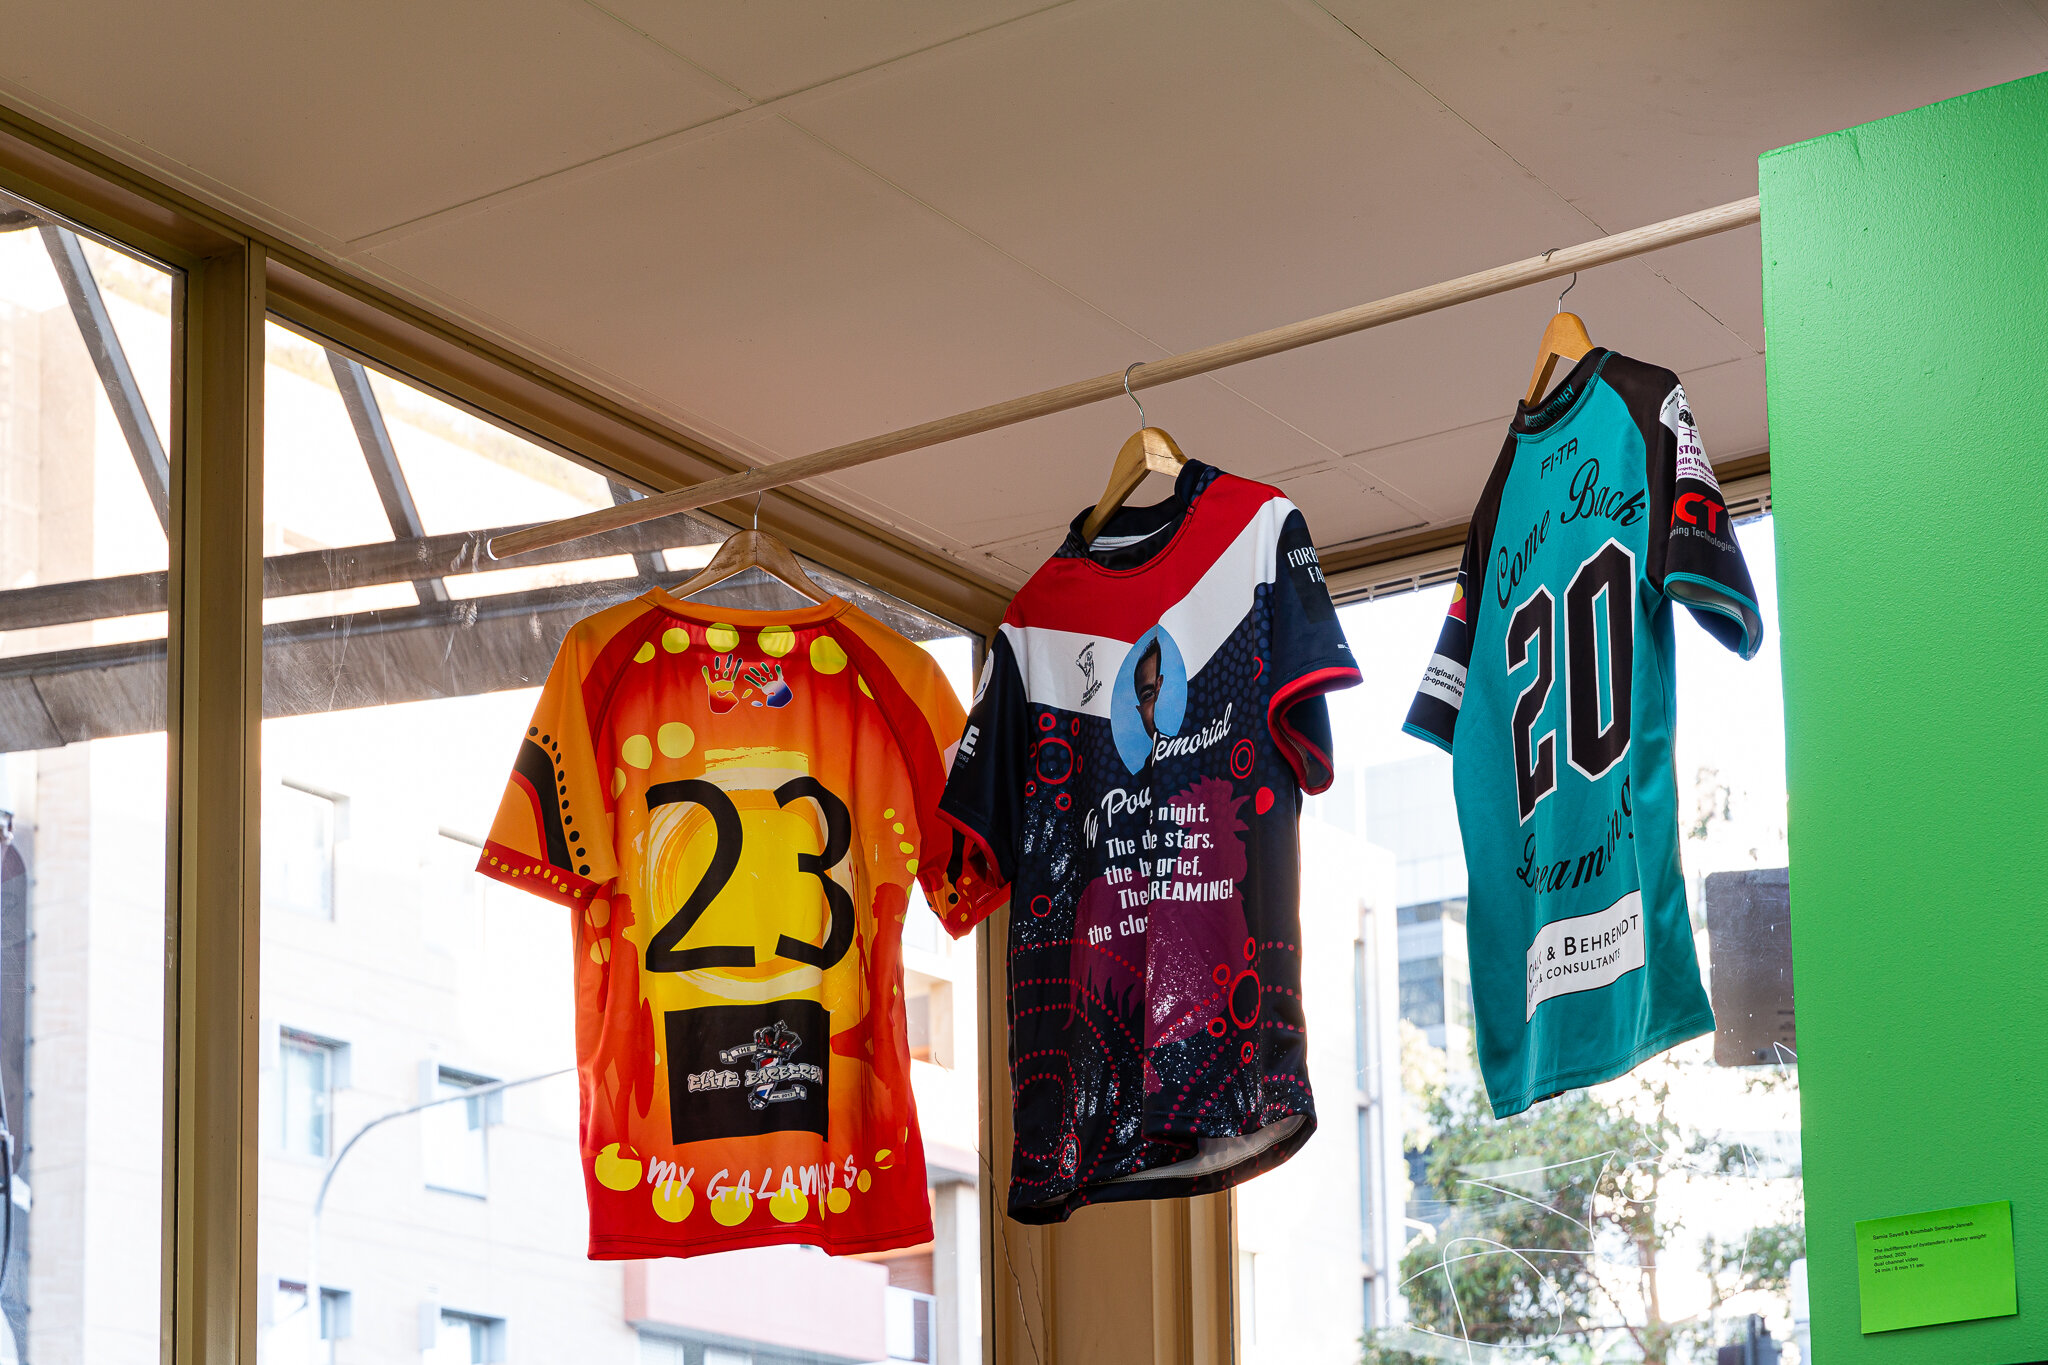  Dhinawan Dreaming Connection, Aboriginal Rugby League Club Jerseys designed by Dylan Brown and Michael Fardon 